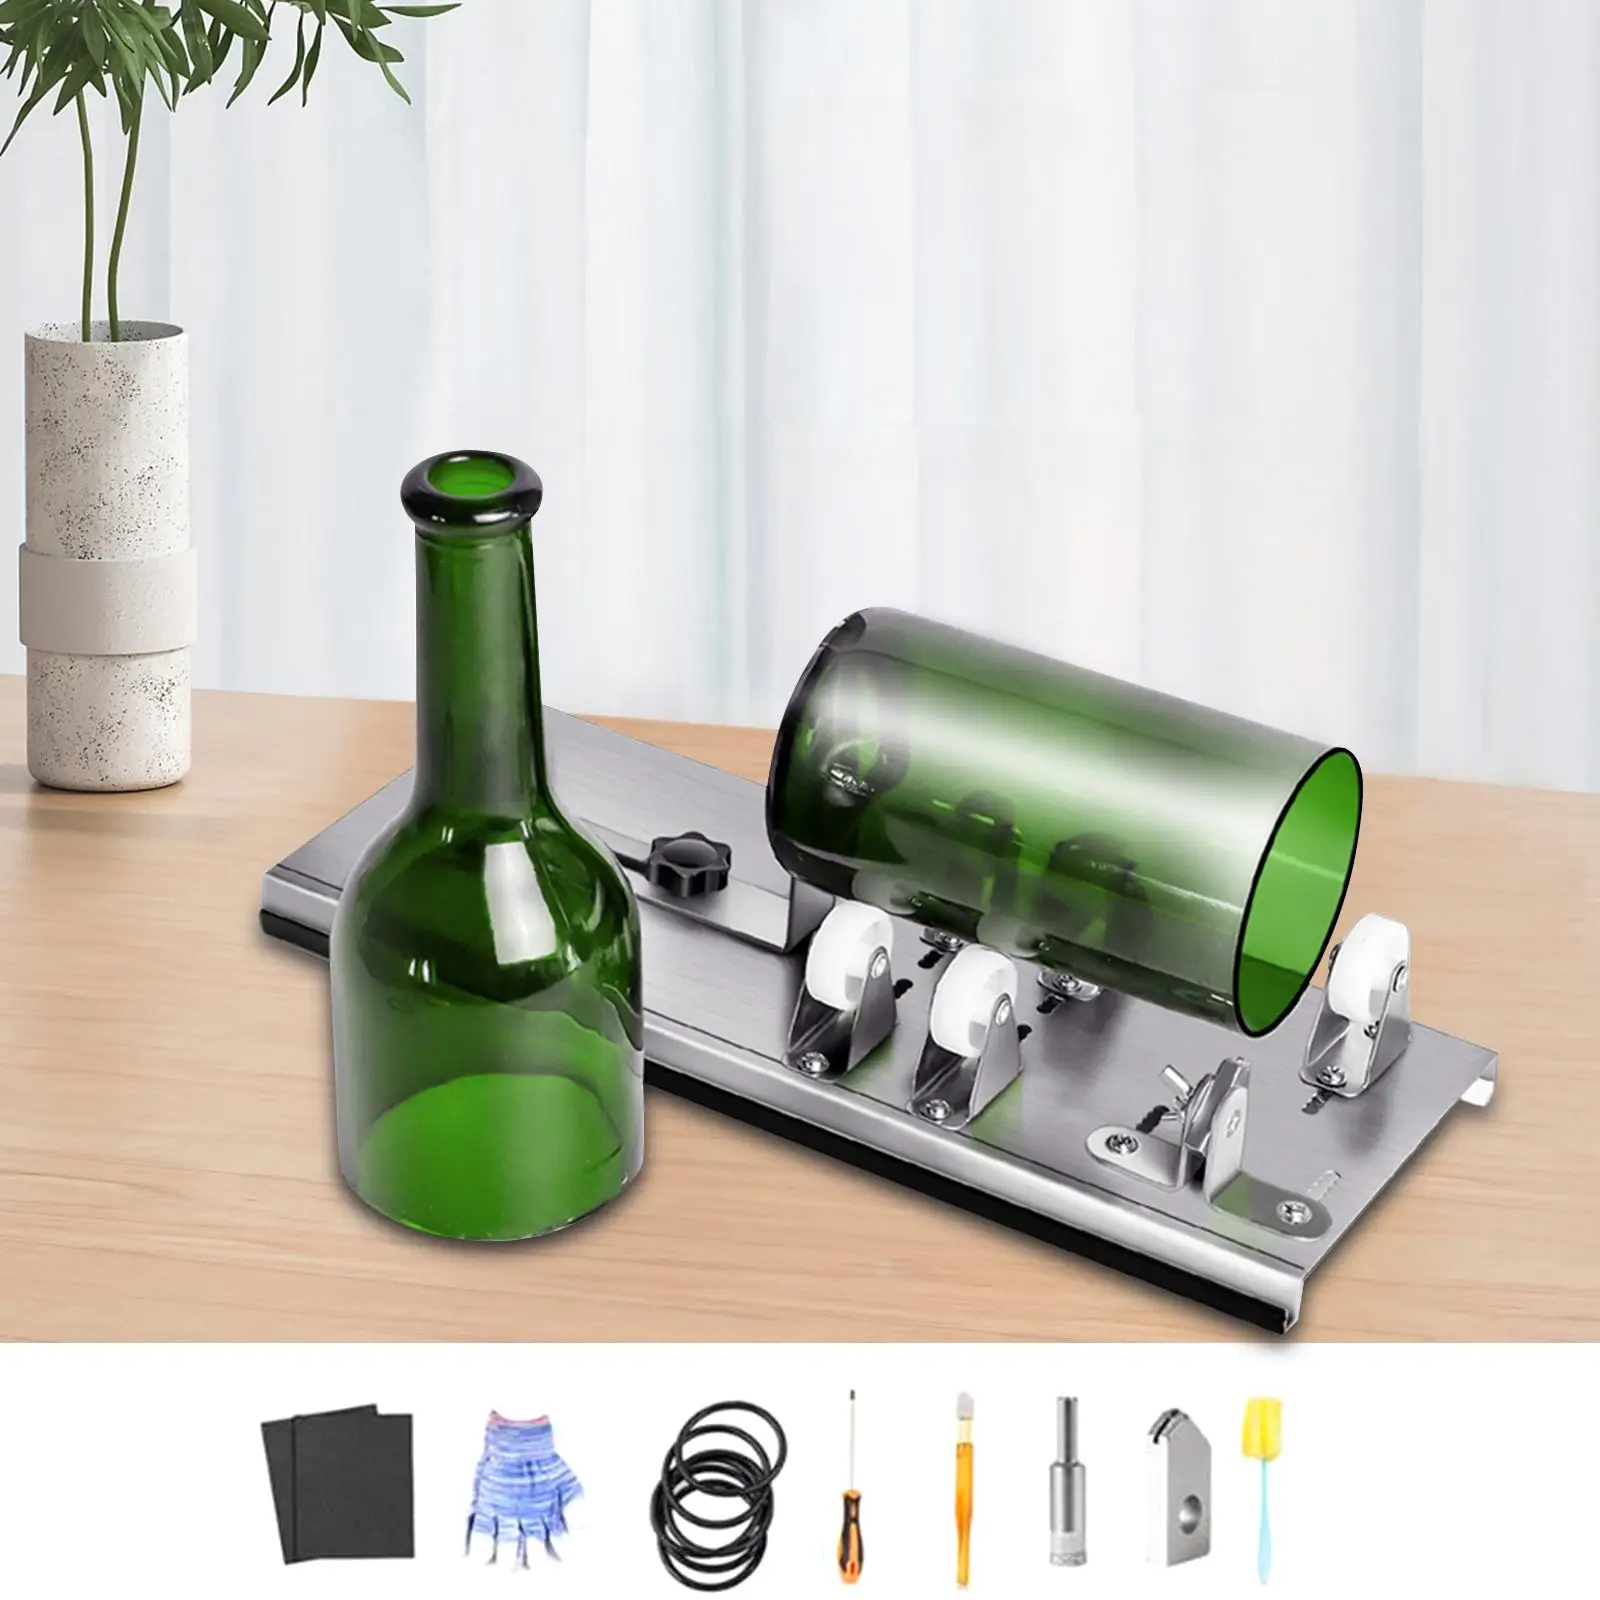 Glass Bottle Cutter Upgraded Manual Tool Durable Crafts Cutting Machine for Pen Holders DIY Flowerpot Lampshades Vases Ornaments